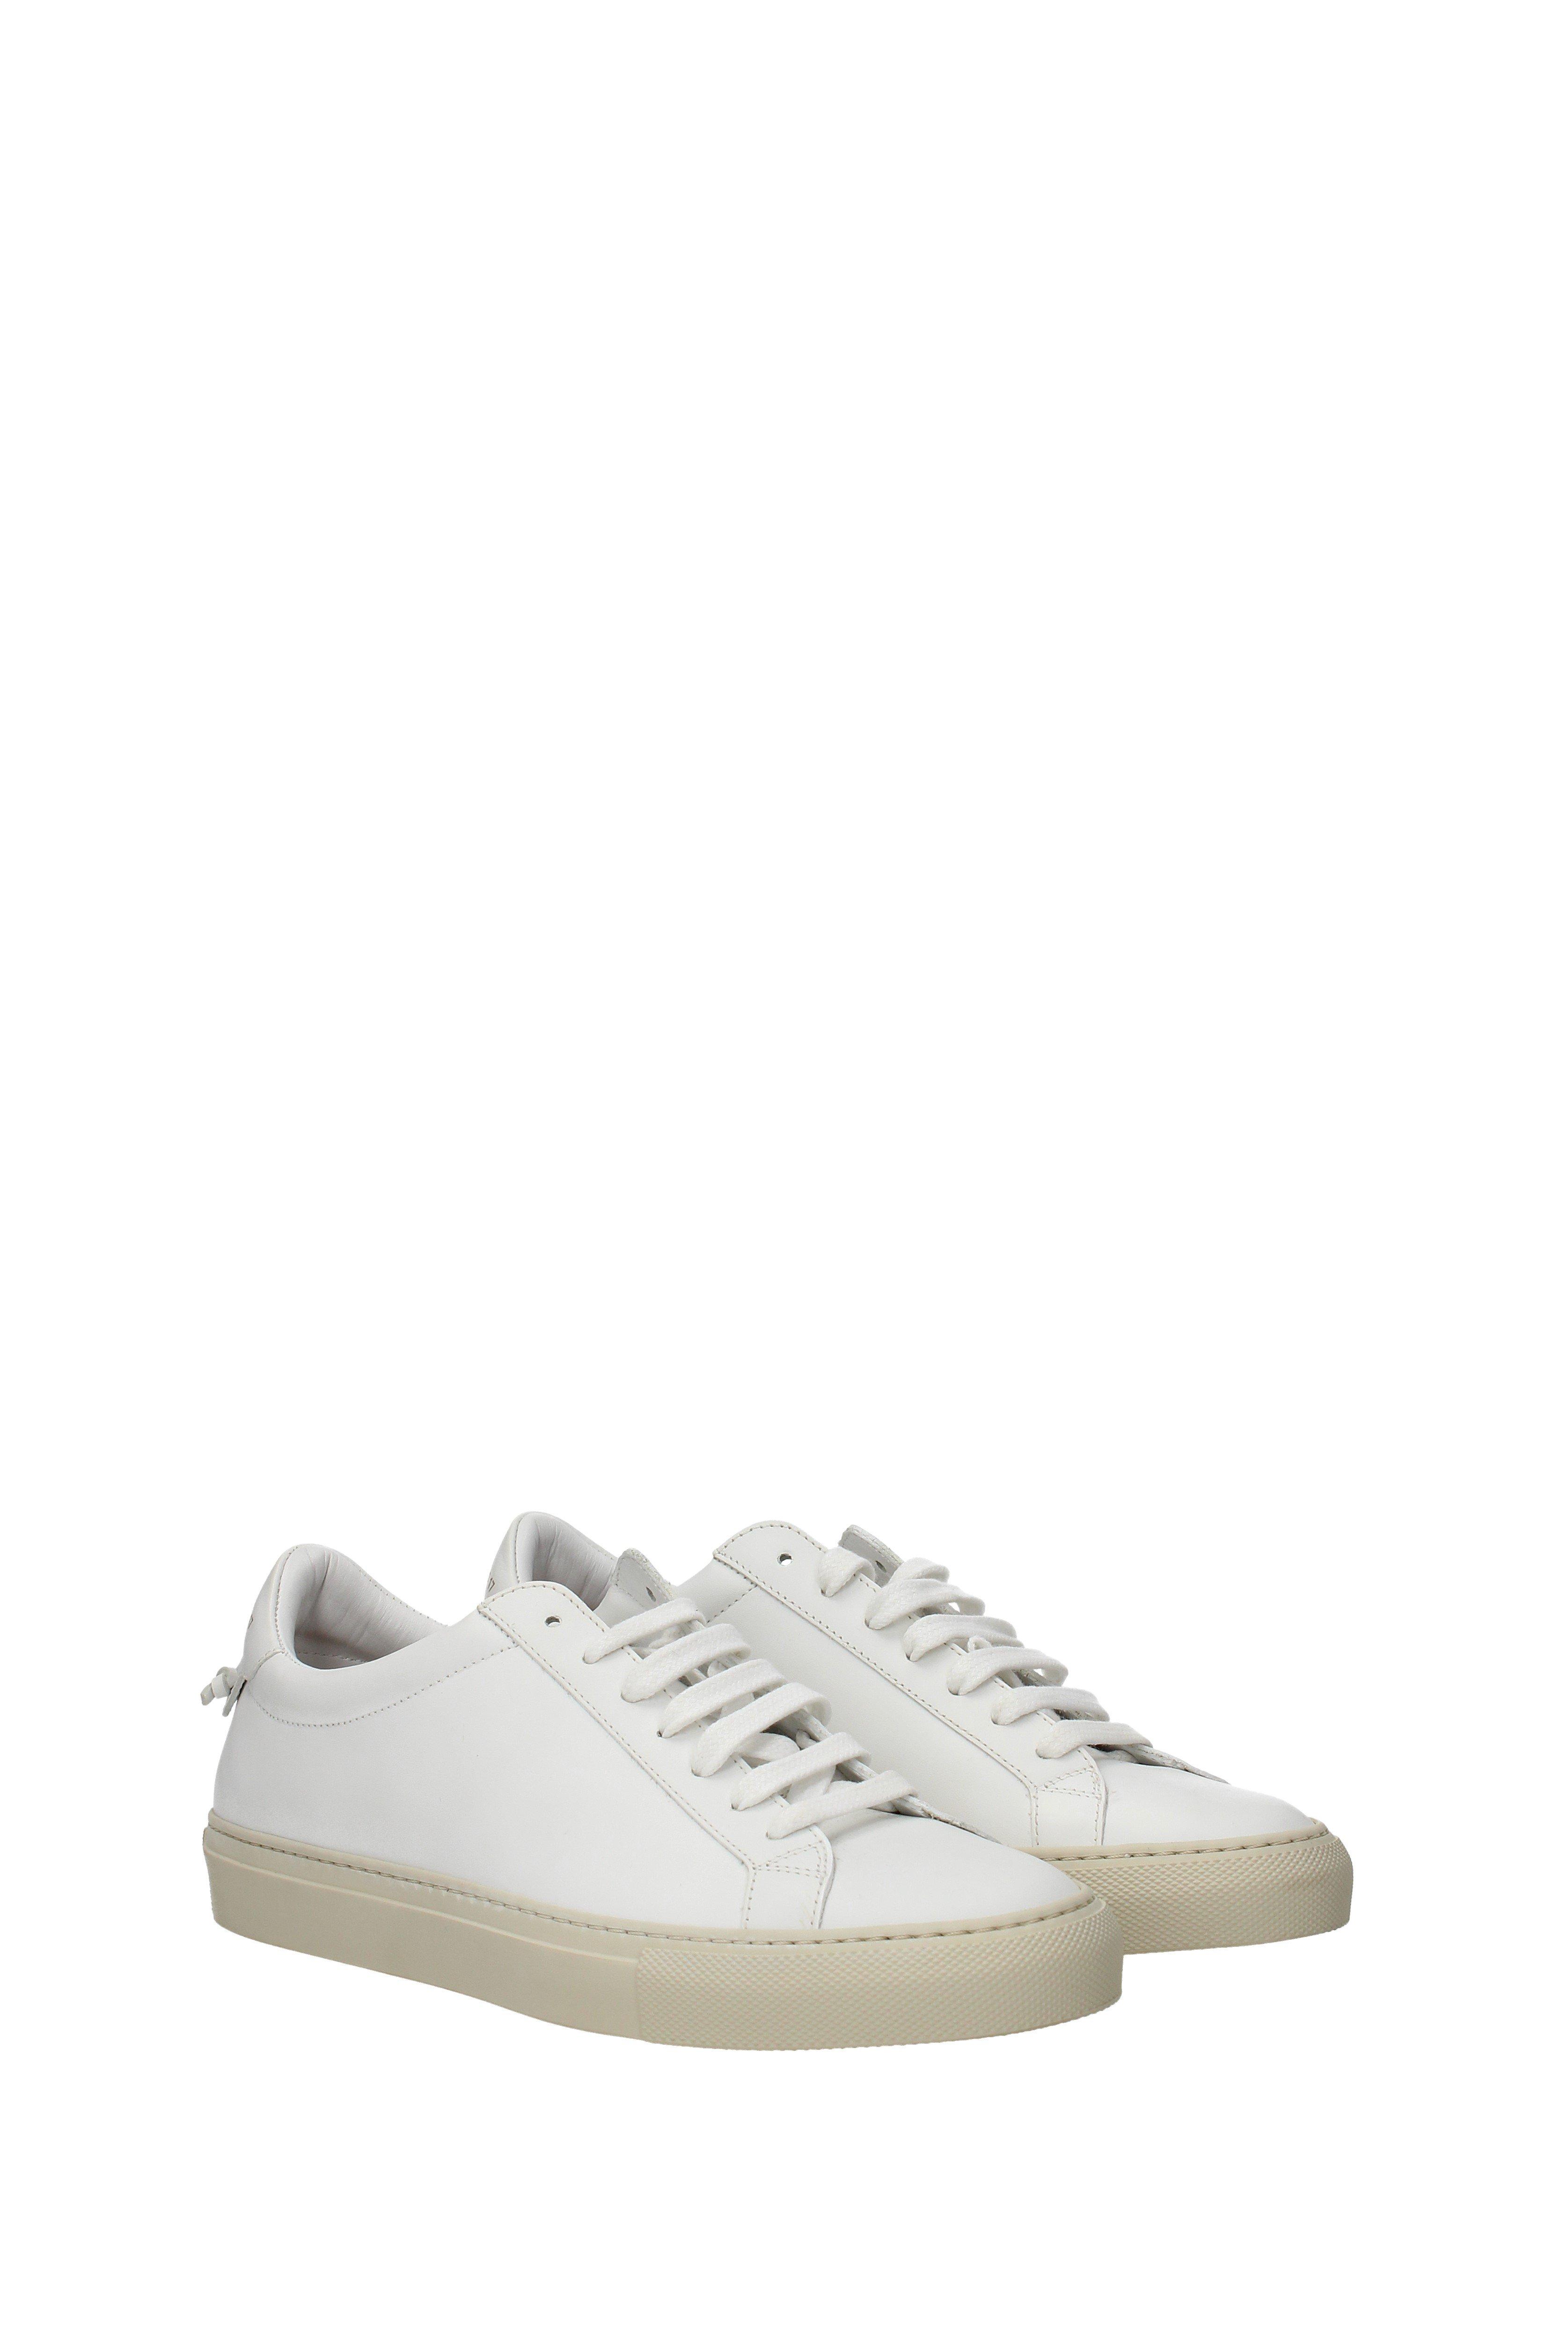 Givenchy Sneakers Women White in White - Lyst